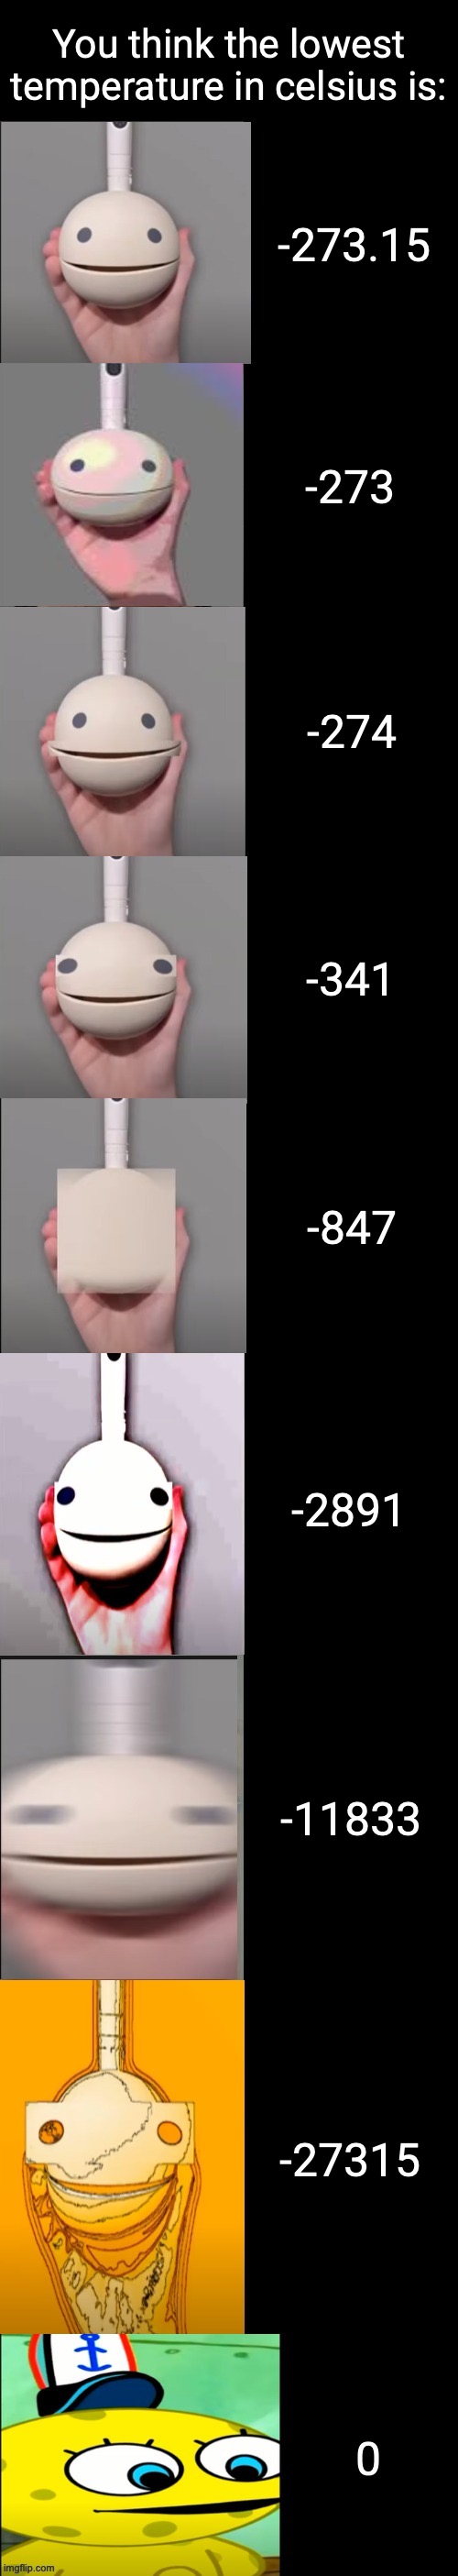 Otamatone becoming idiot |  You think the lowest temperature in celsius is:; -273.15; -273; -274; -341; -847; -2891; -11833; -27315 | image tagged in otamatone becoming idiot,idiot,otamatone,wah wah | made w/ Imgflip meme maker